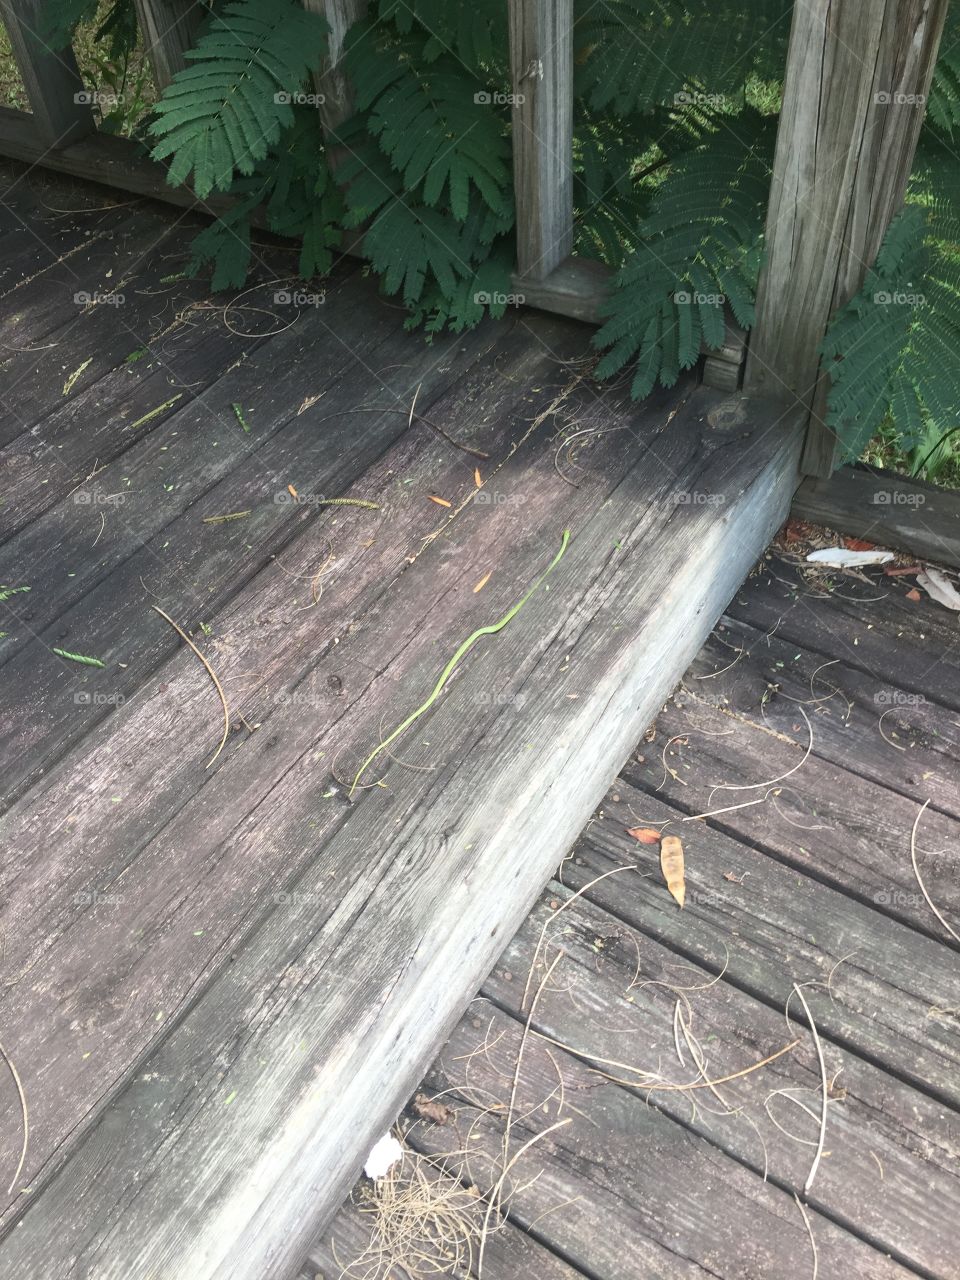 A small green snake slithering across a country porch. 